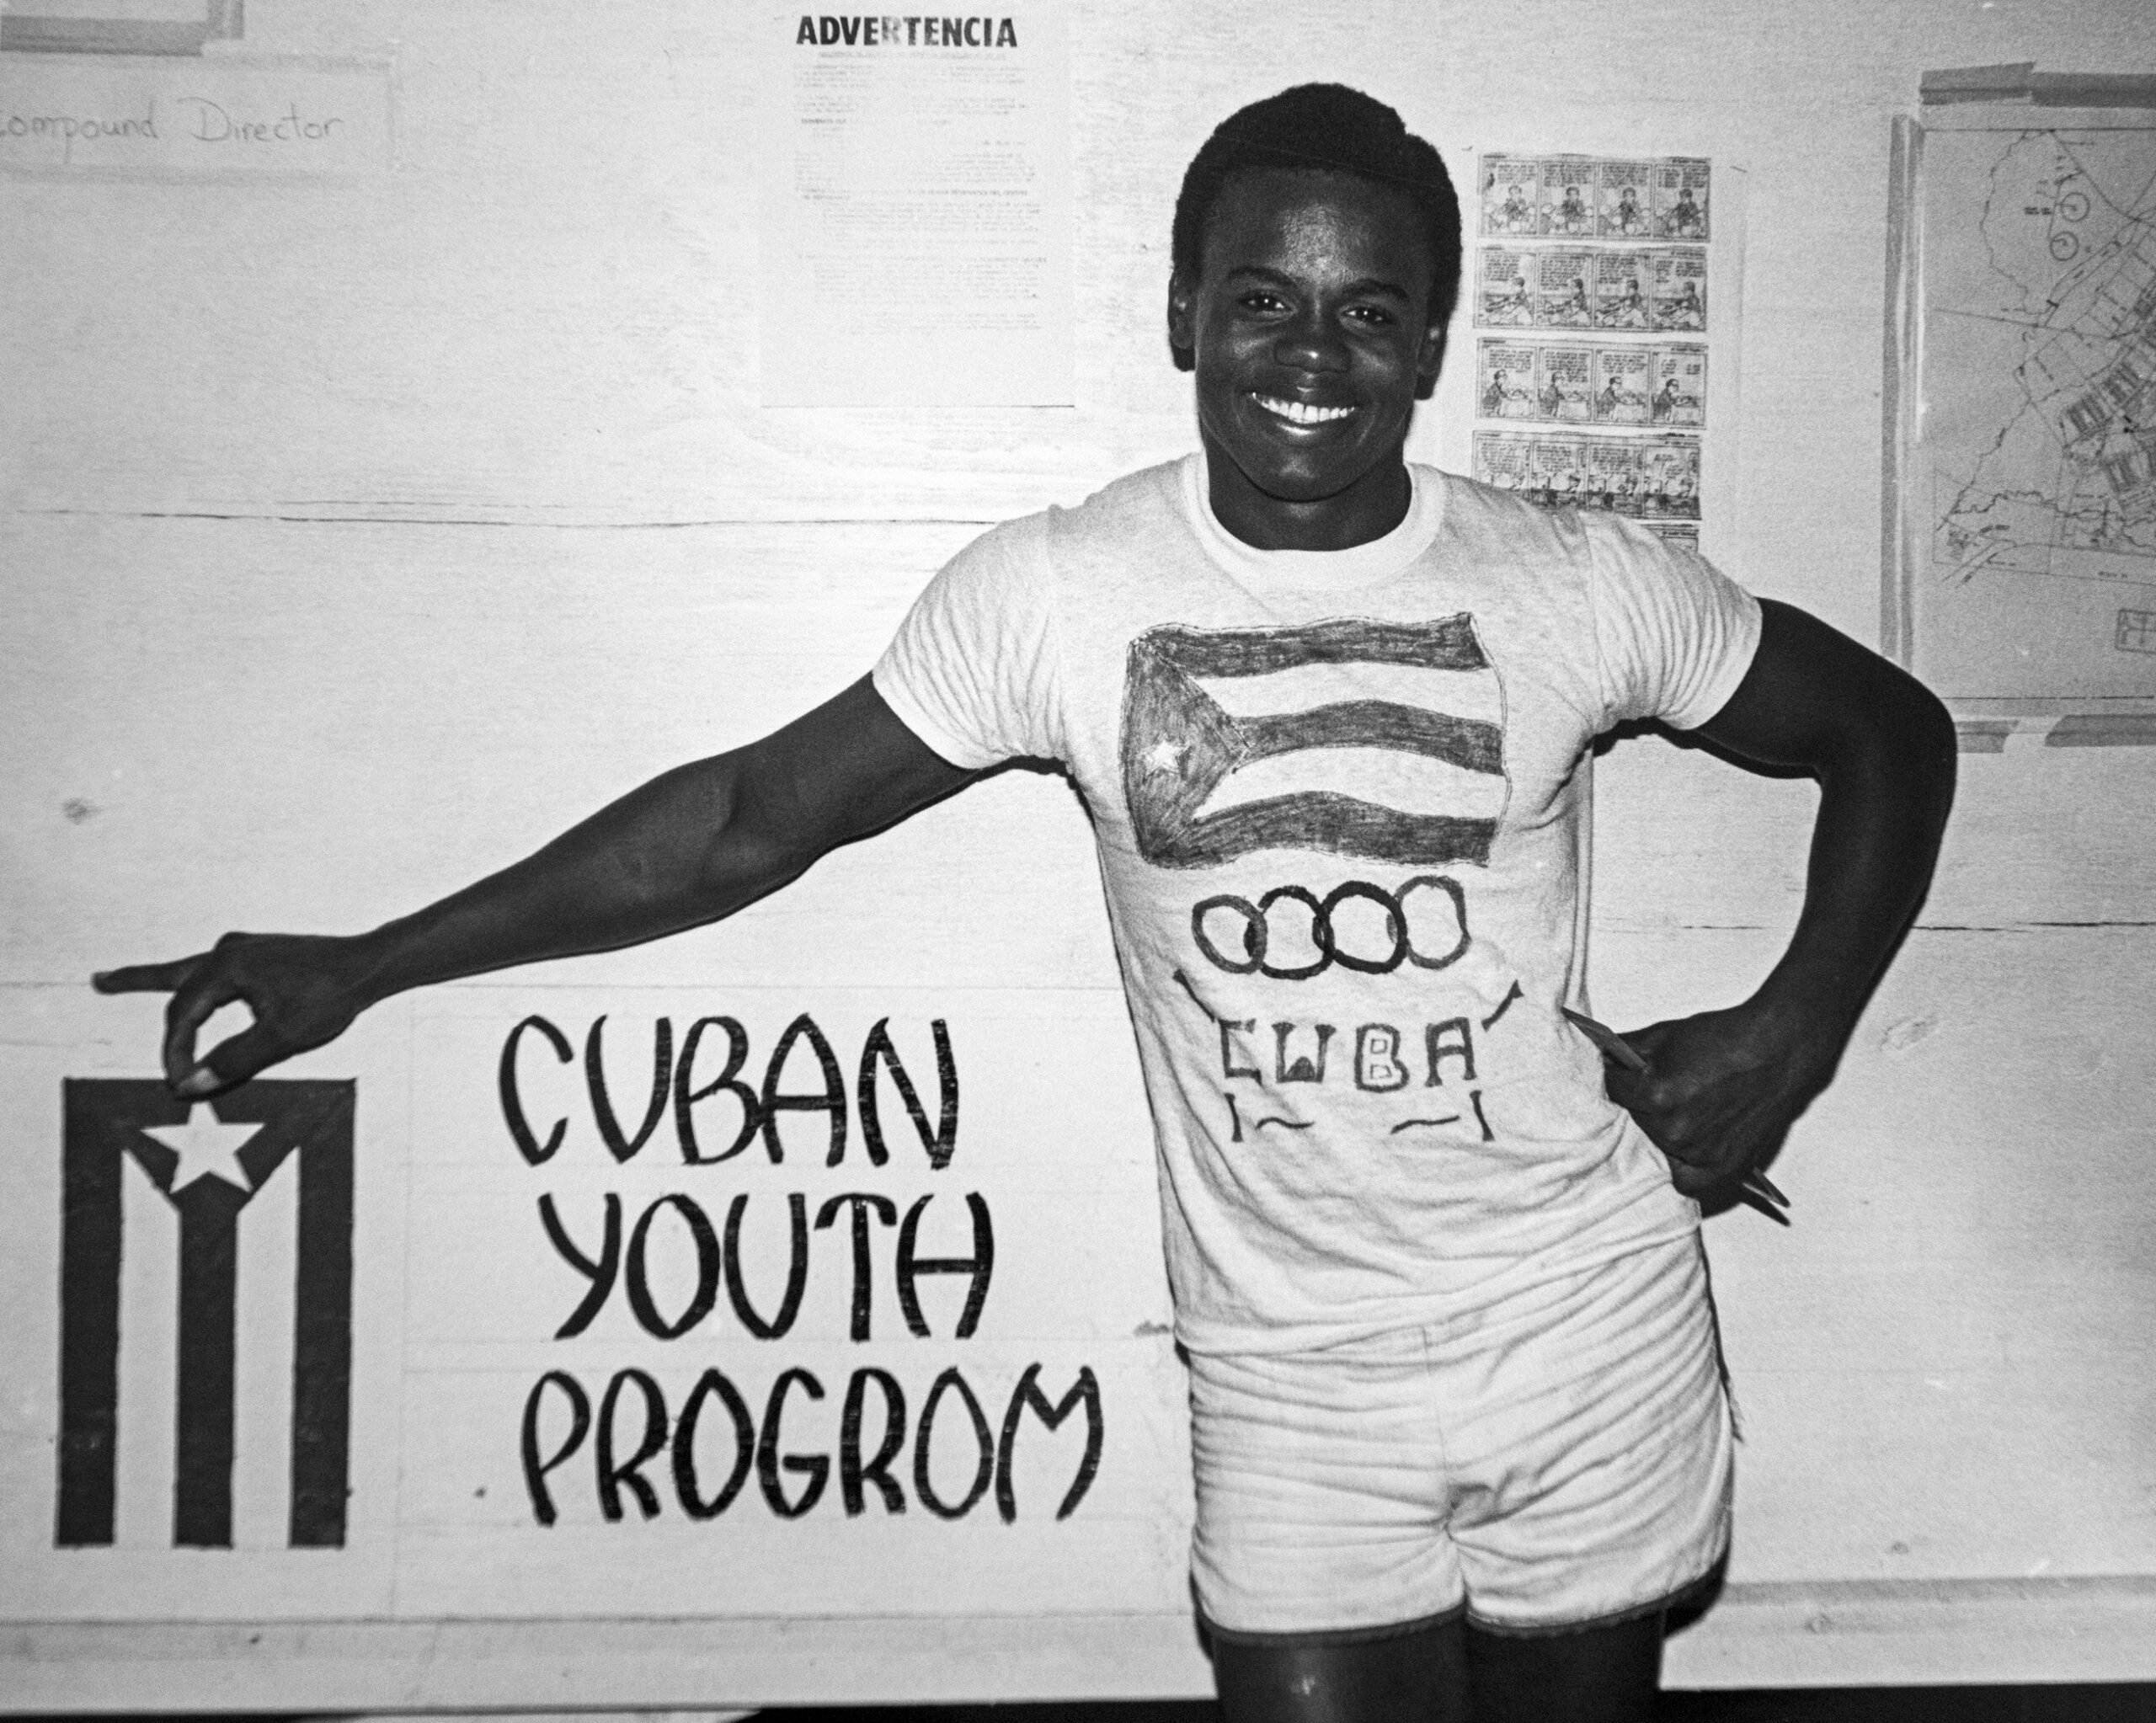 Leandro De Armas-Rodriguez displays his hand-painted t-shirt with the emblem of the Cuban Youth Program on it